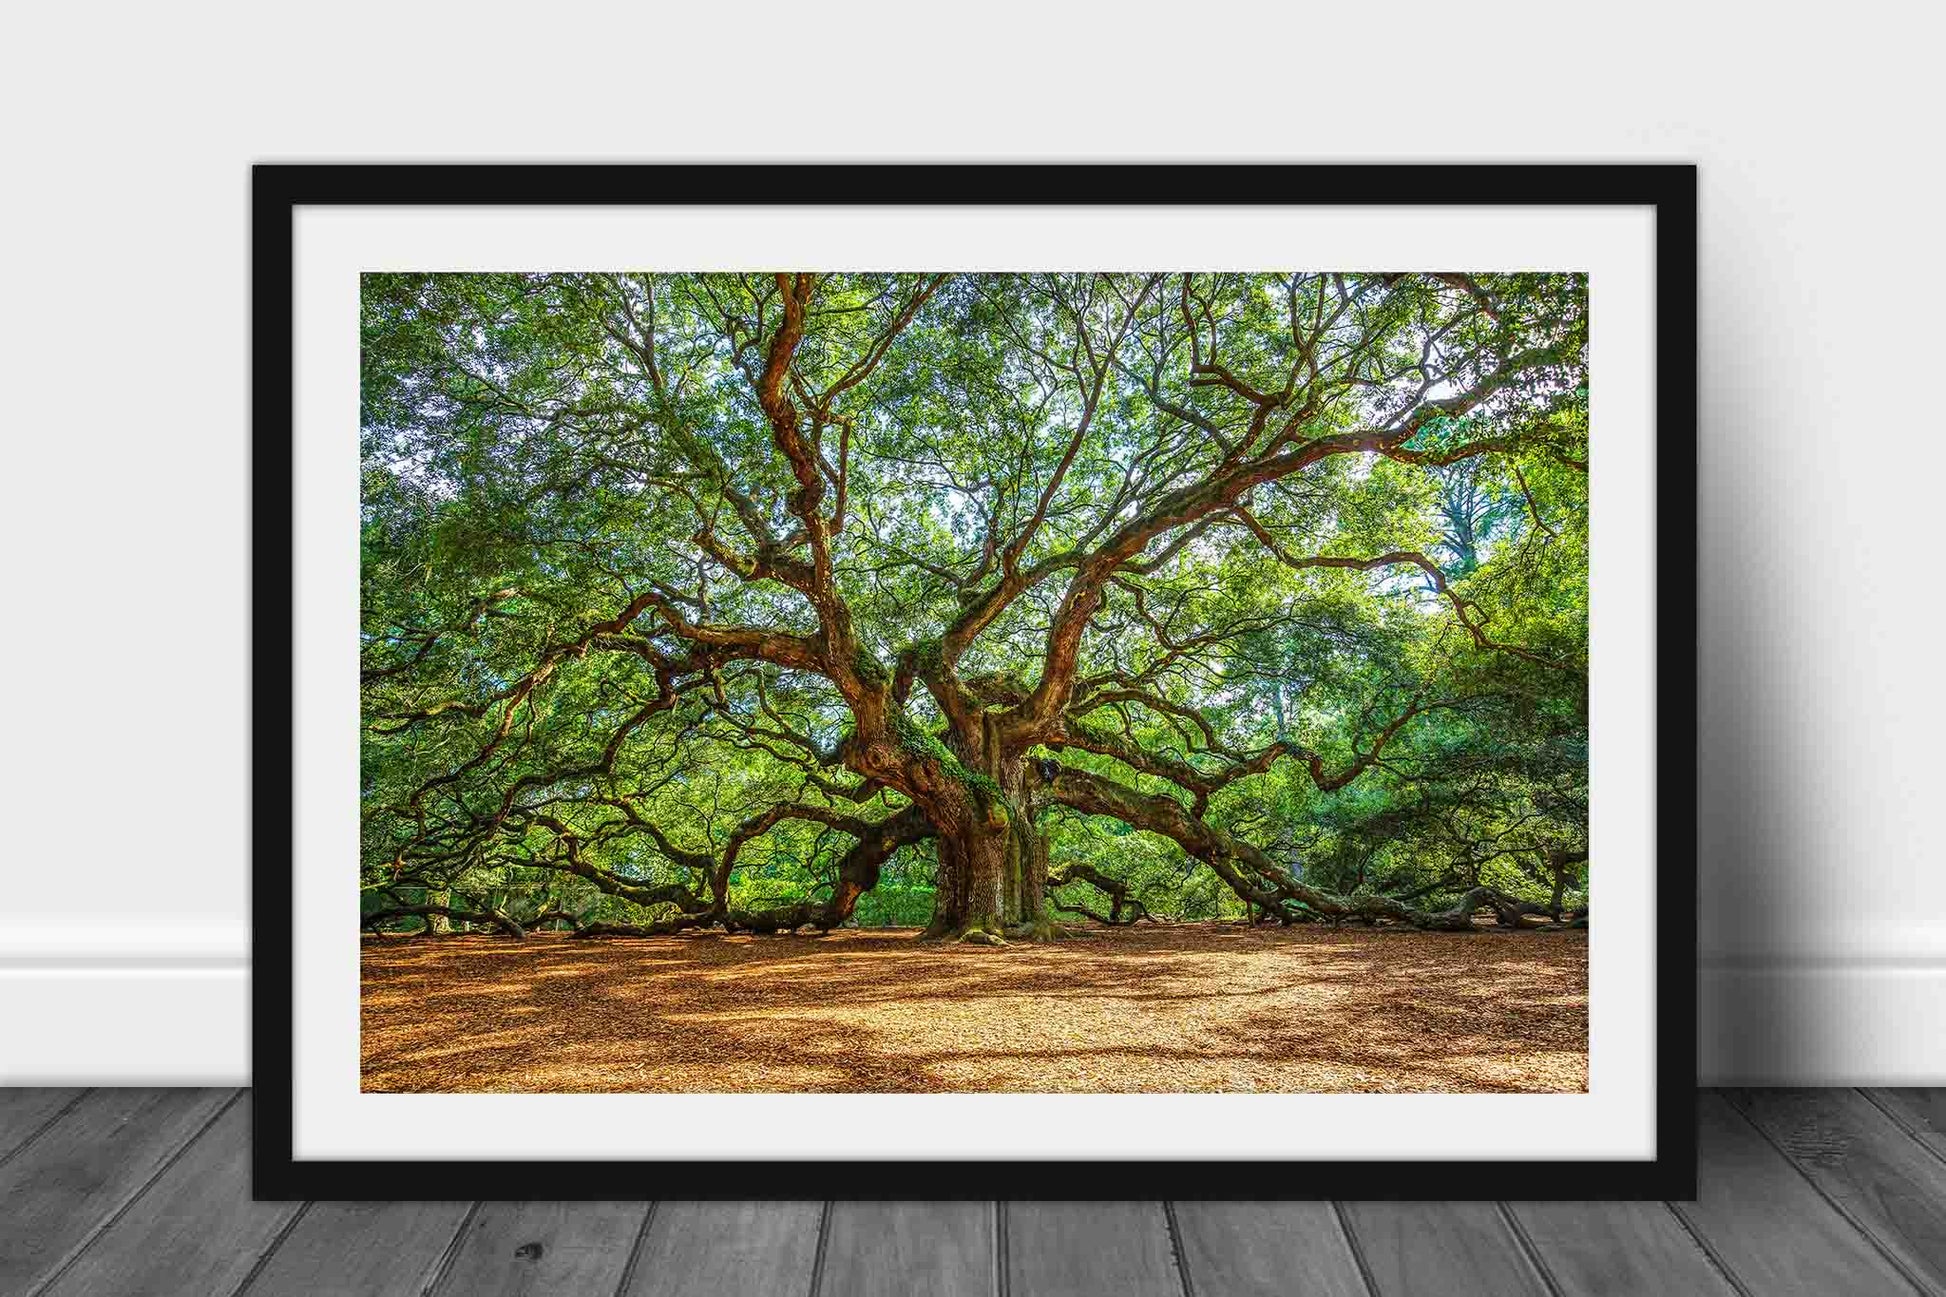 Framed and matted nature photography print of the Angel Oak Tree on a summer day at Johns Island near Charleston, South Carolina by Sean Ramsey of Southern Plains Photography.